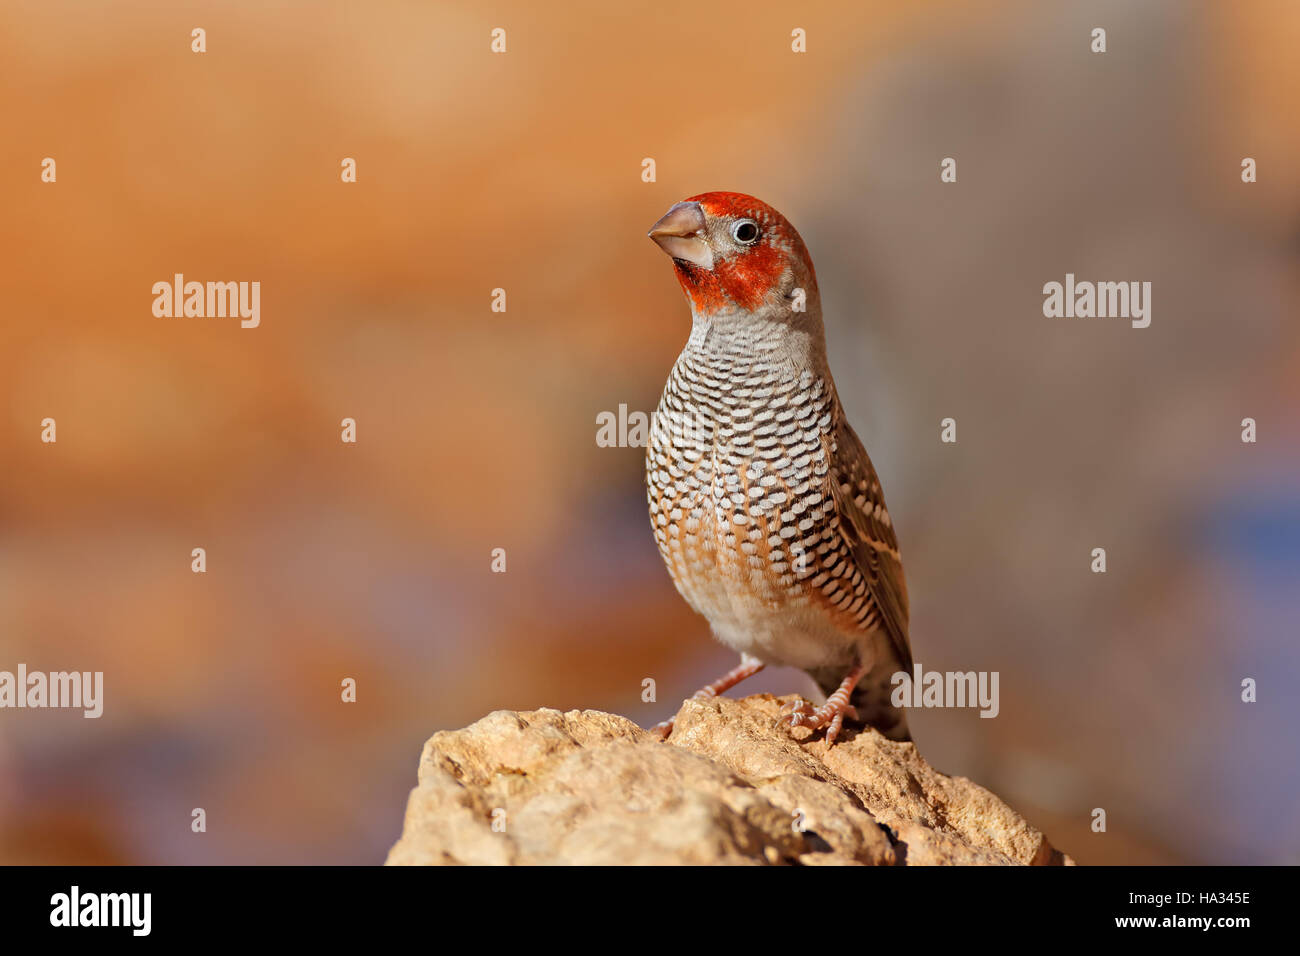 Male red-headed finch (Amadina erythrocephala) sitting on a rock, South Africa Stock Photo